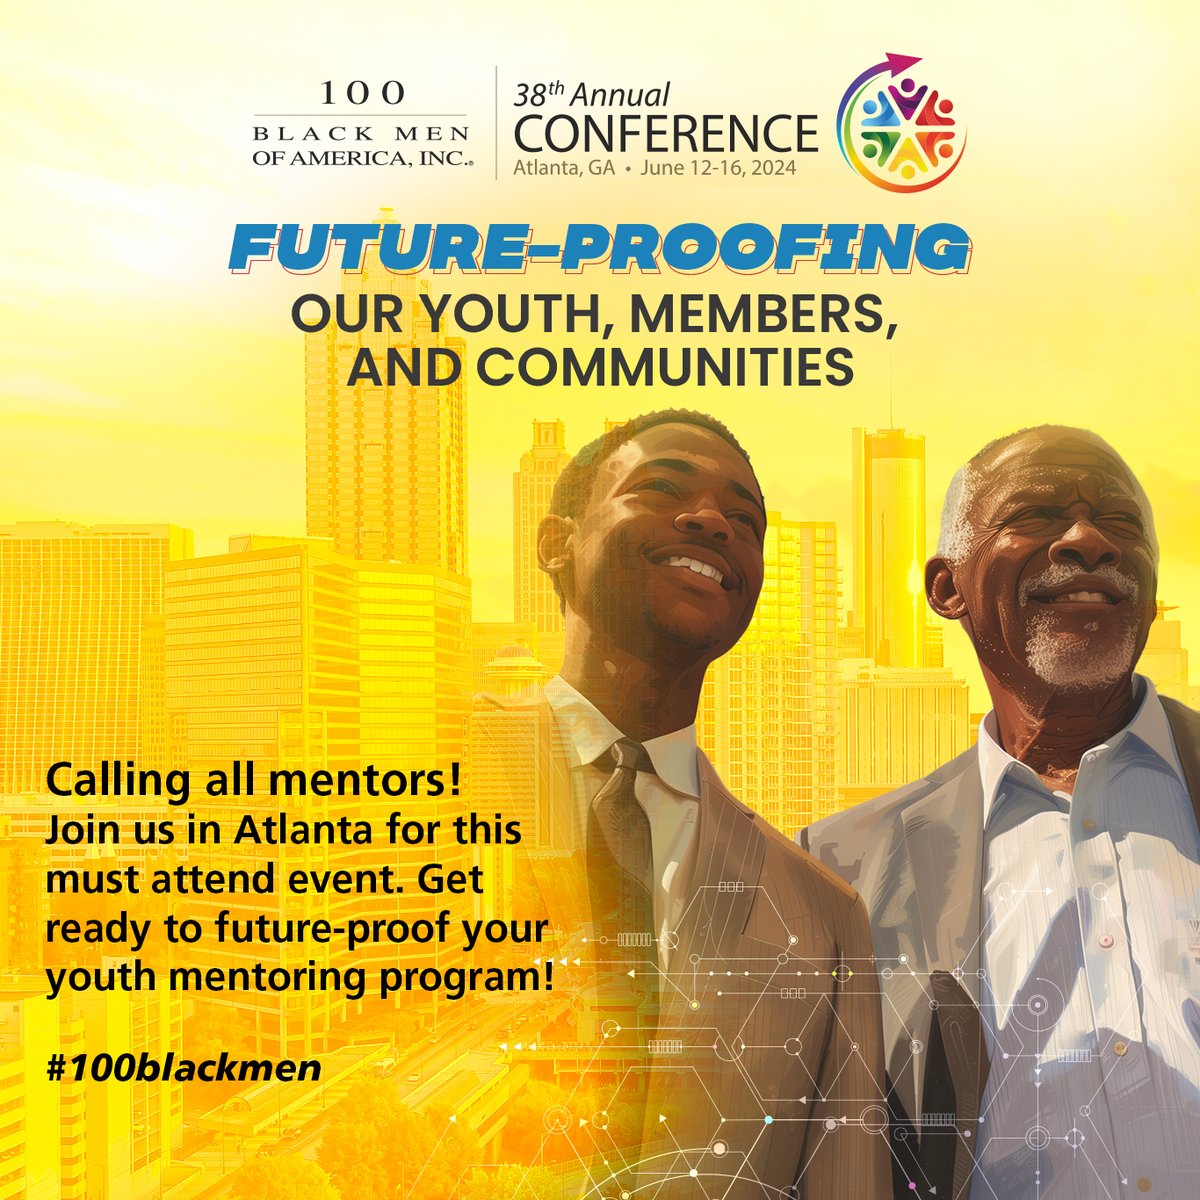 Join us at the 38th Annual Conference. Future-proof your youth programs with insights, connections, and strategies that make a difference. Let's shape tomorrow's leaders together! #100BlackMen #MentorshipMatters Register today: events.100blackmen.org/event/38thannu…